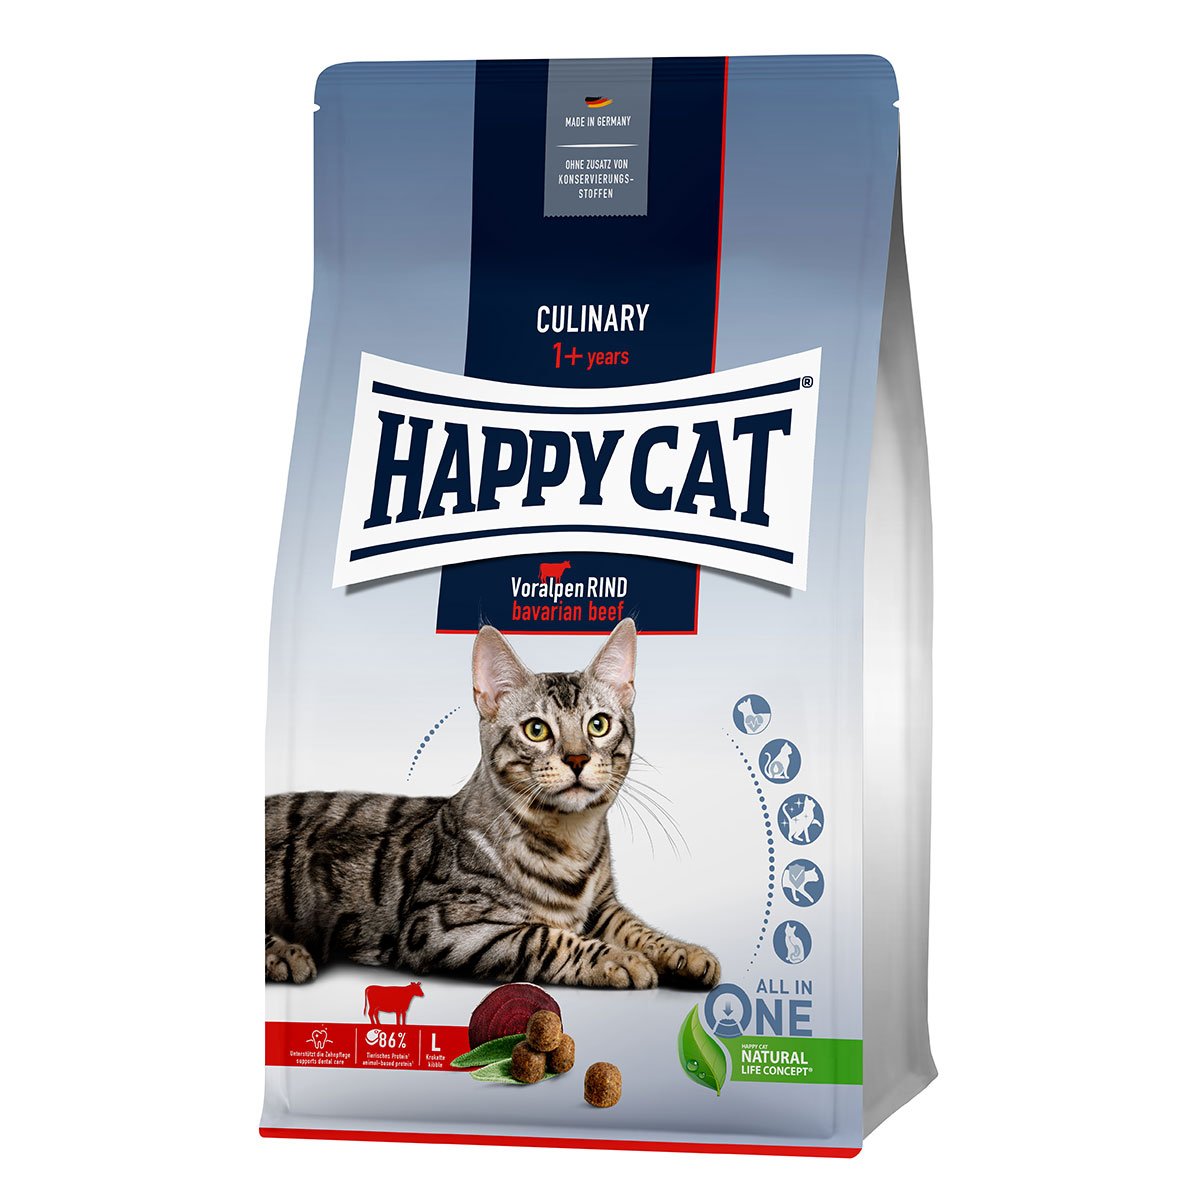 Happy Cat Culinary Adult Voralpen Rind 2x10kg